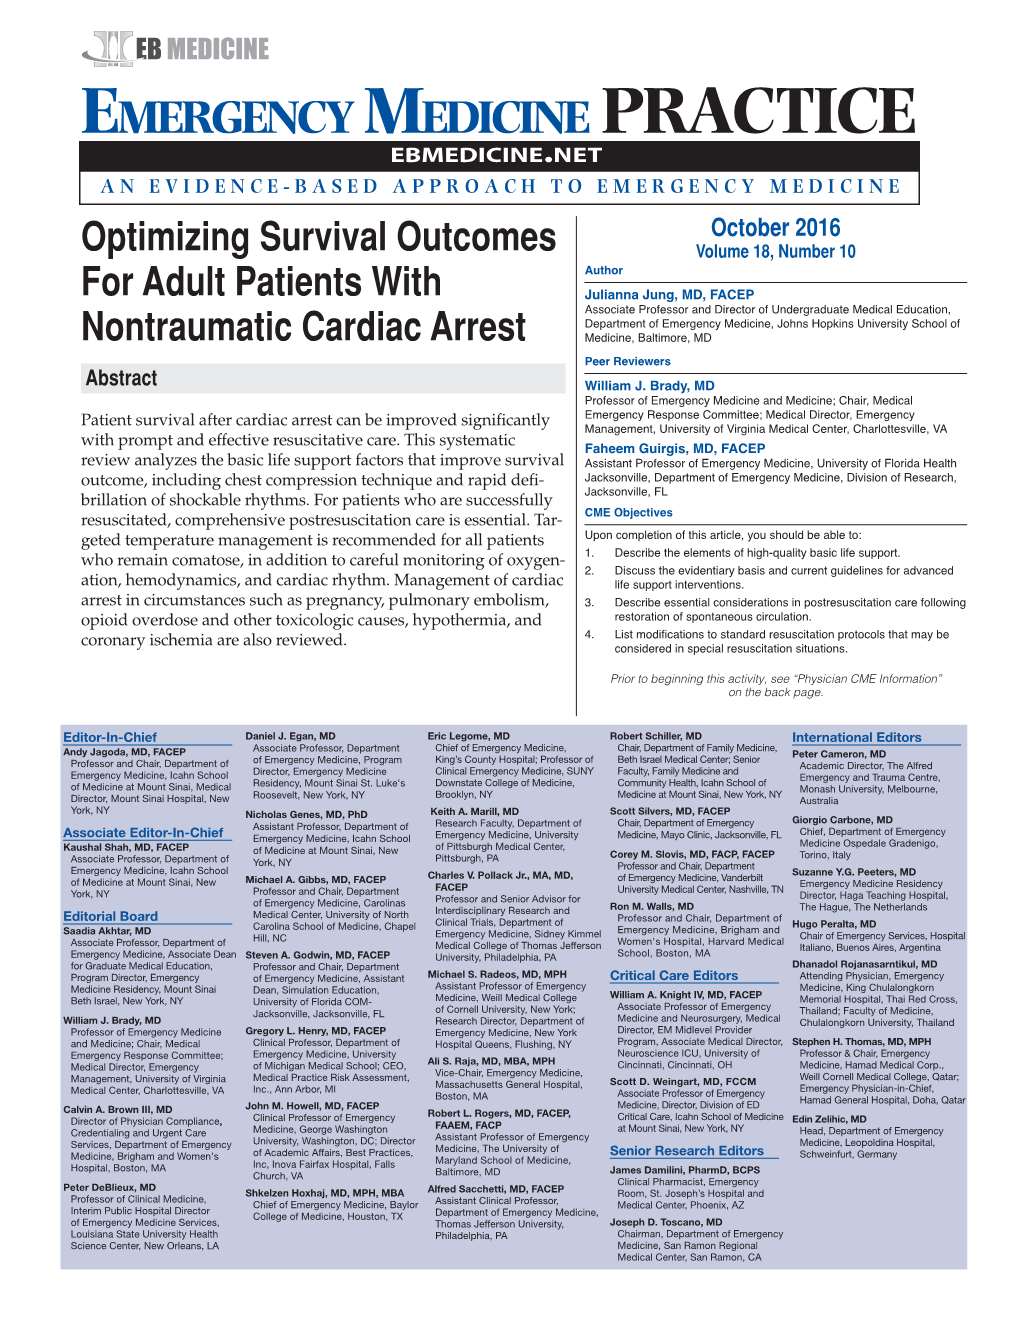 Optimizing Survival Outcomes for Adult Patients with Nontraumatic